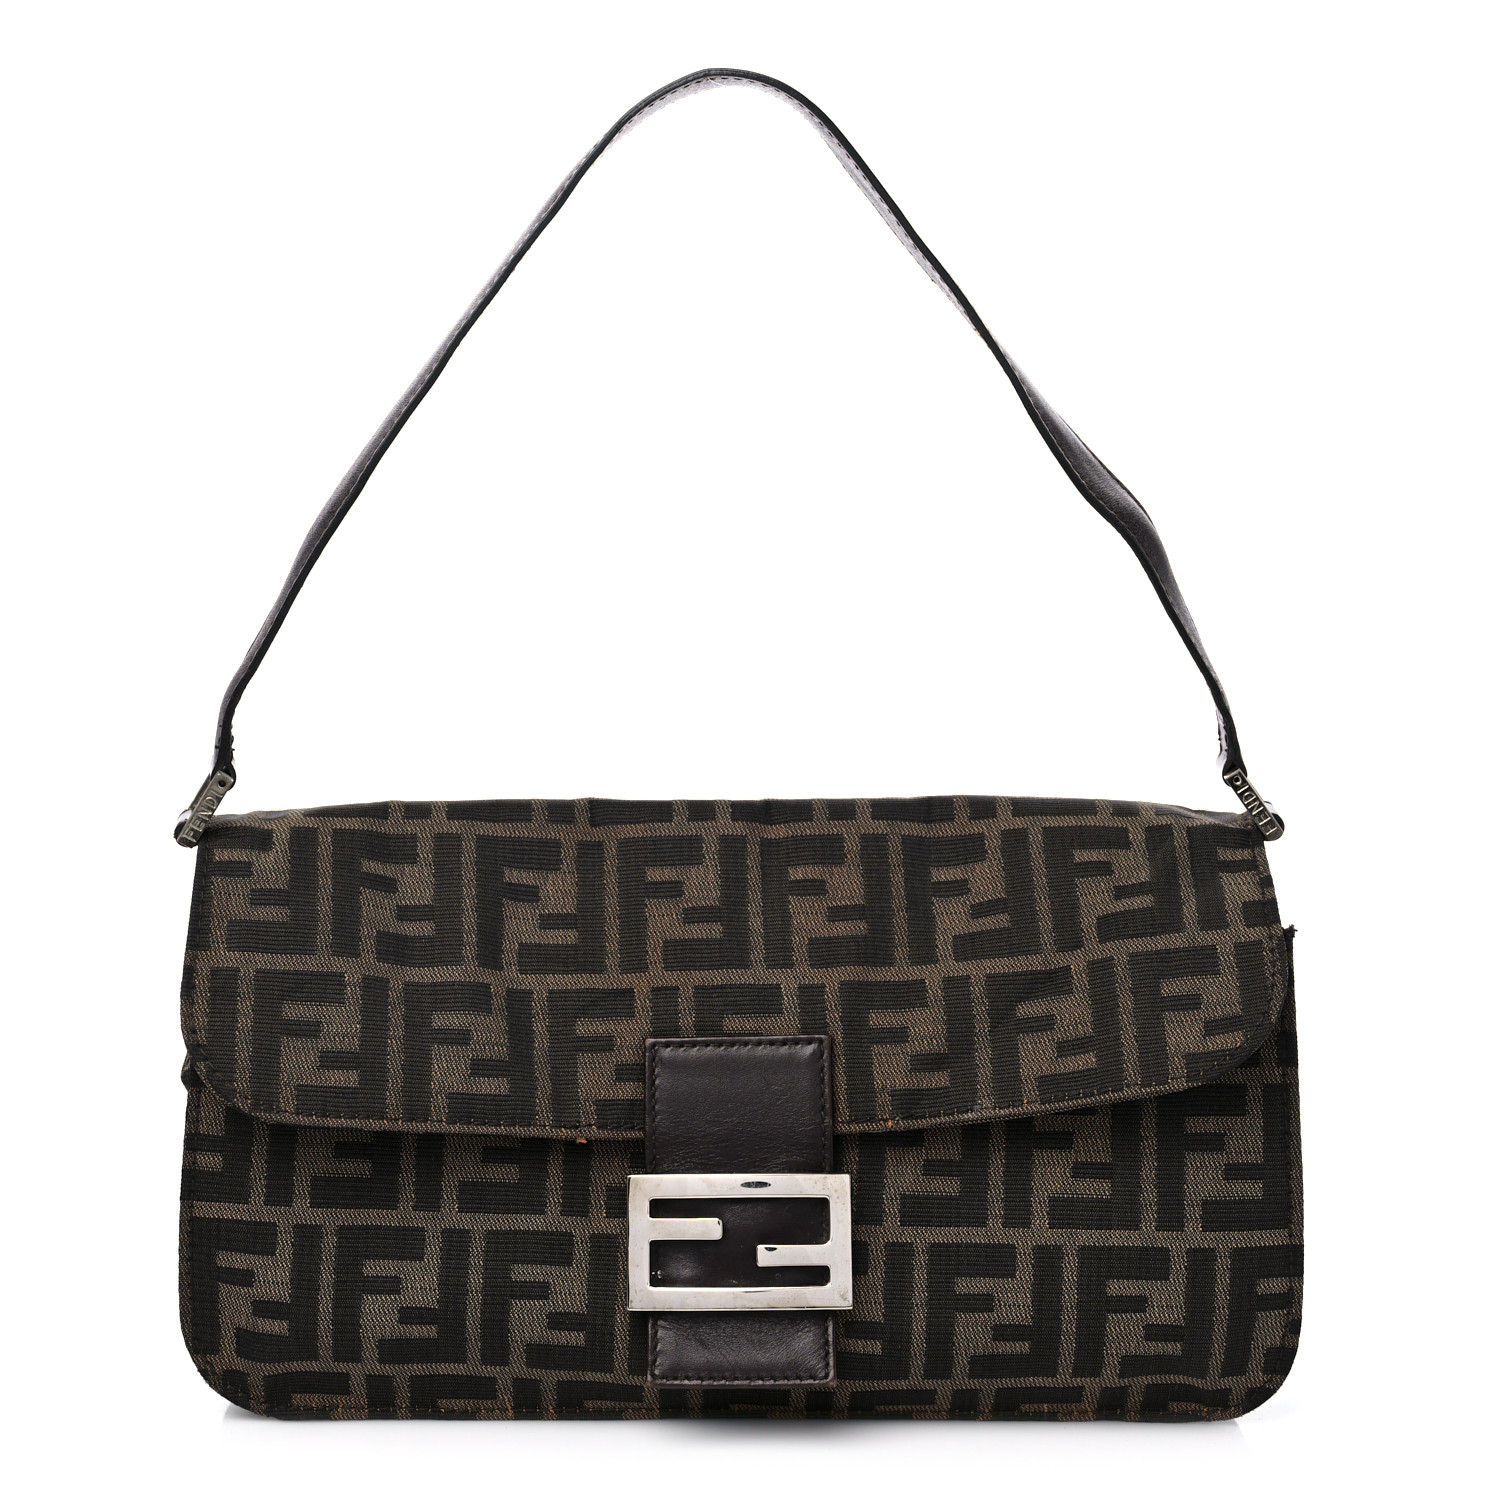 image of FENDI Zucca Baguette in the color Tobacco by FASHIONPHILE